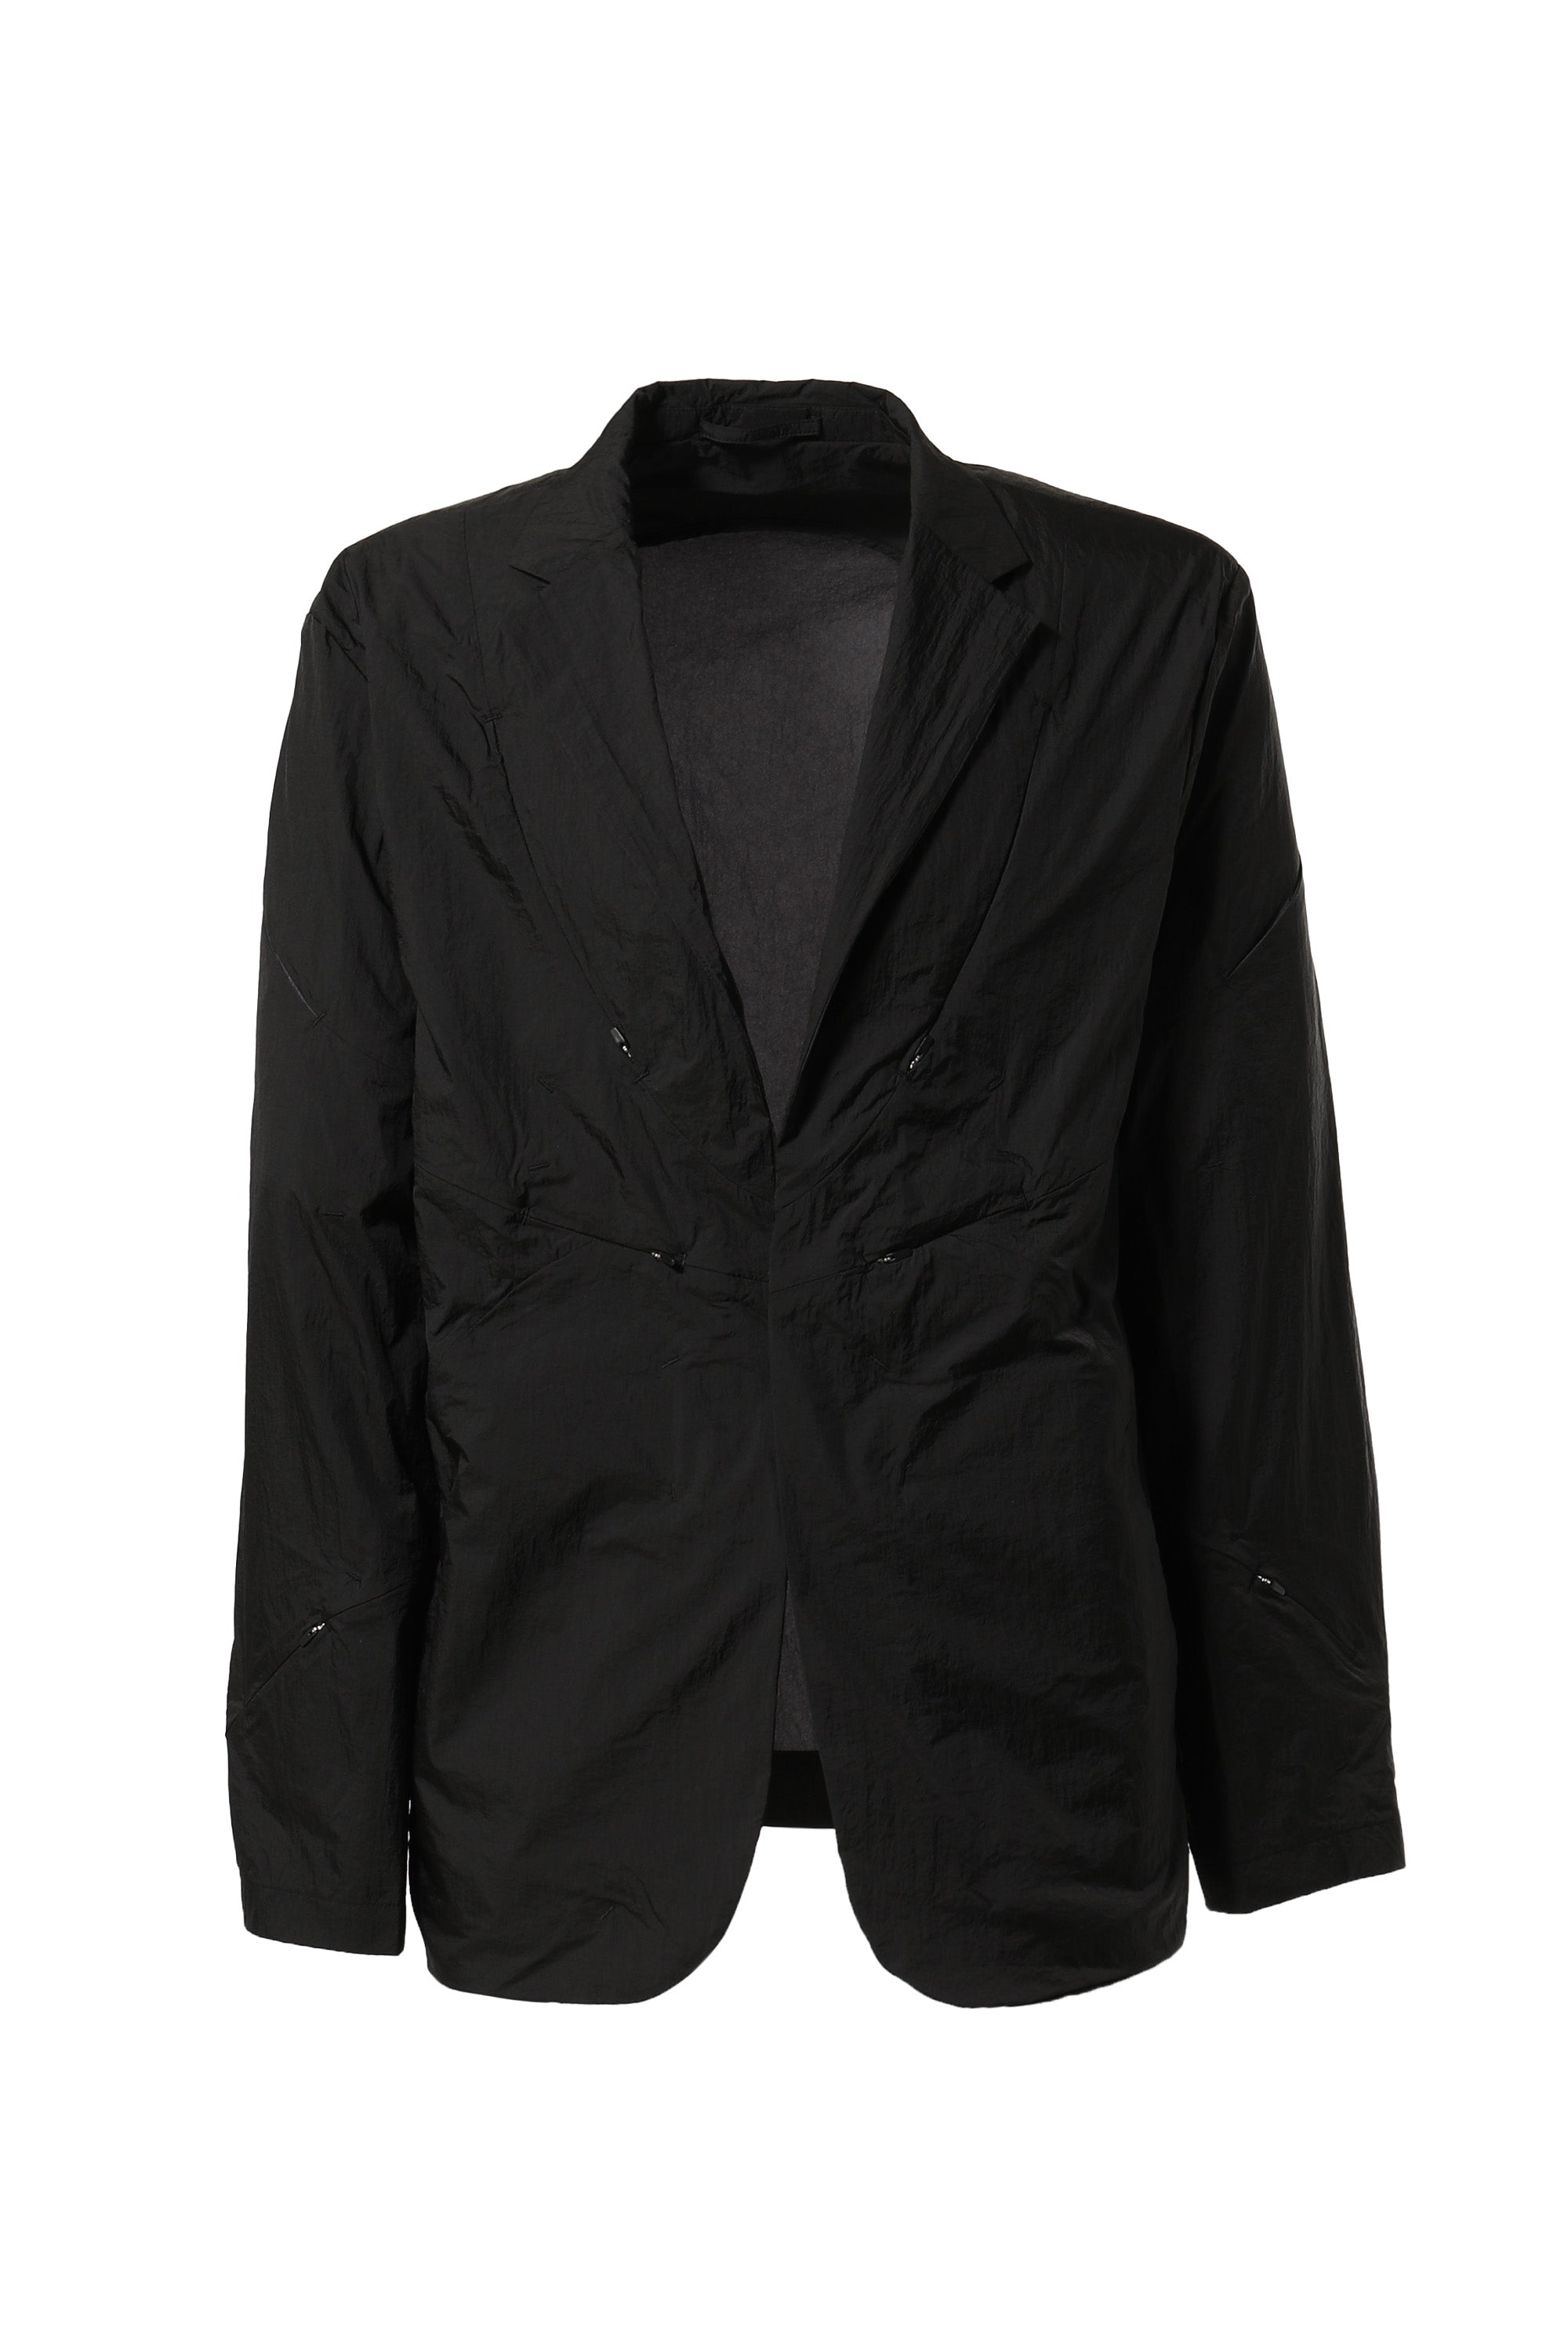 POST ARCHIVE FACTION SS23 5.0+ JACKET CENTER / BLK/CHA